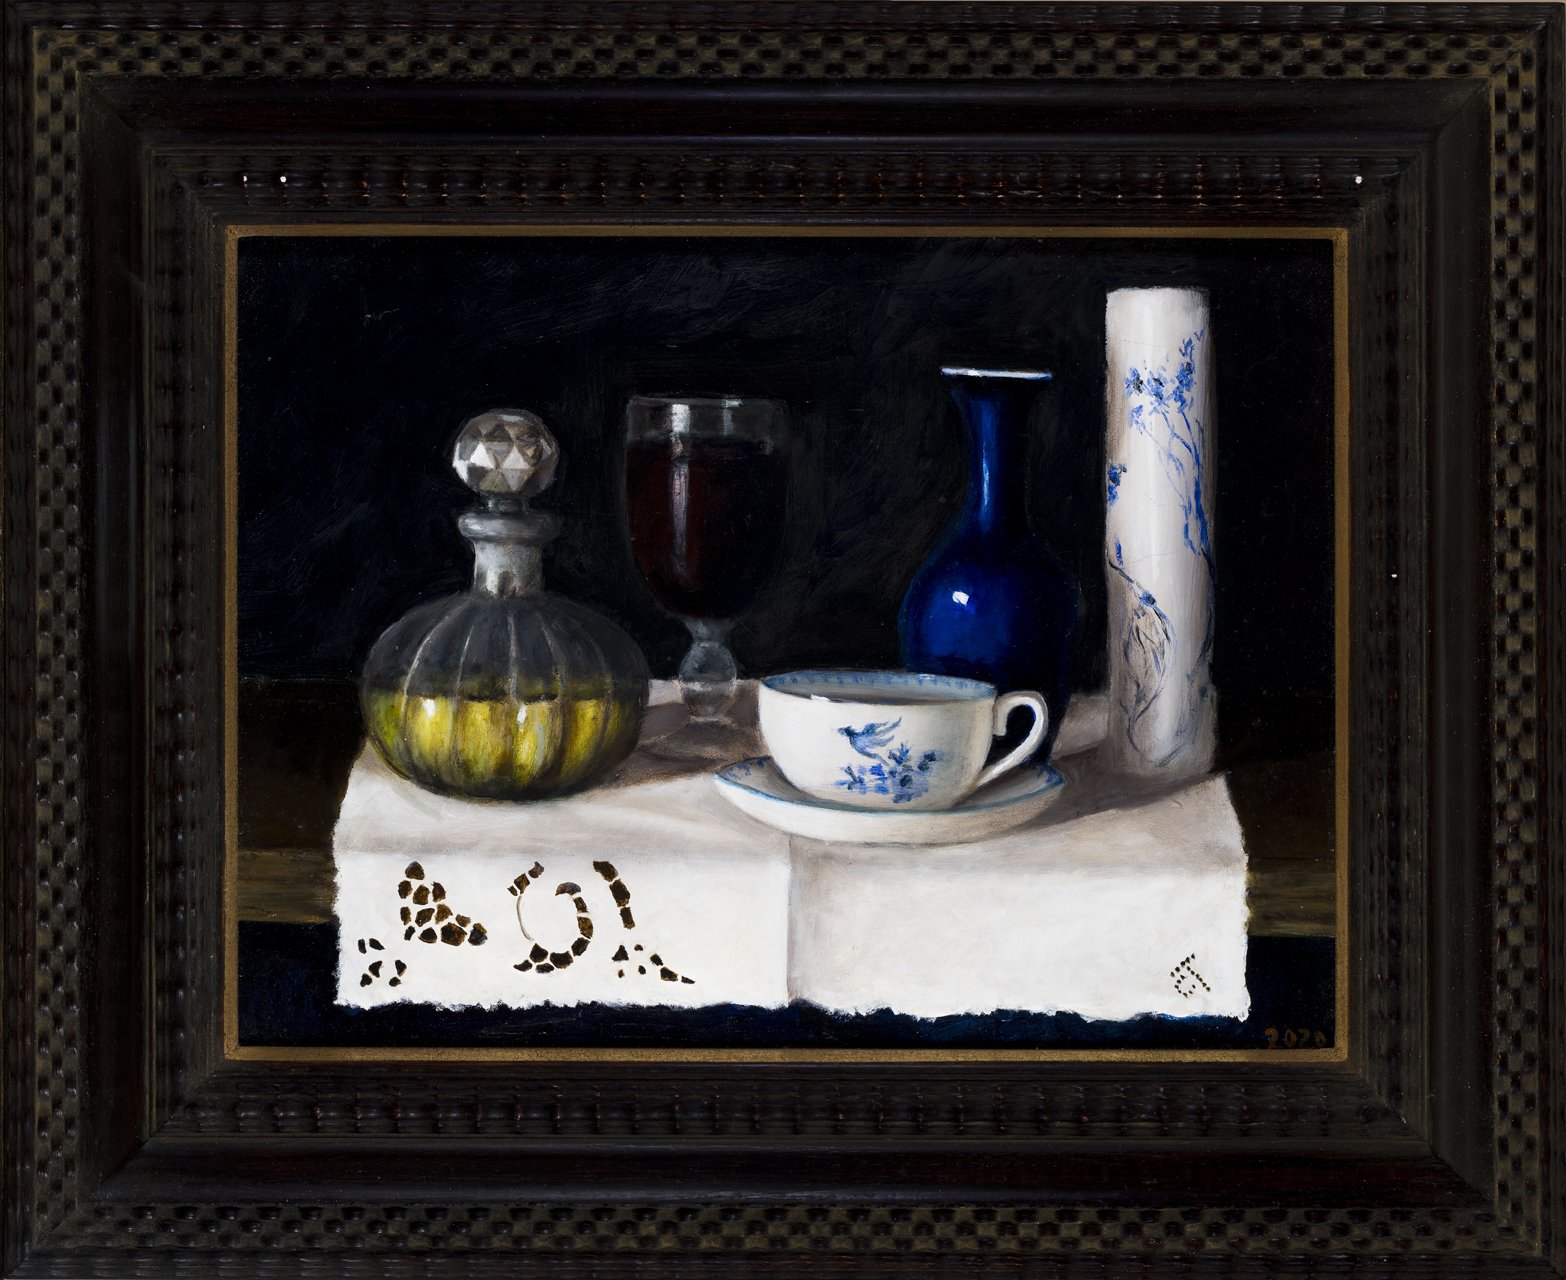 Still life with decanter and teacup